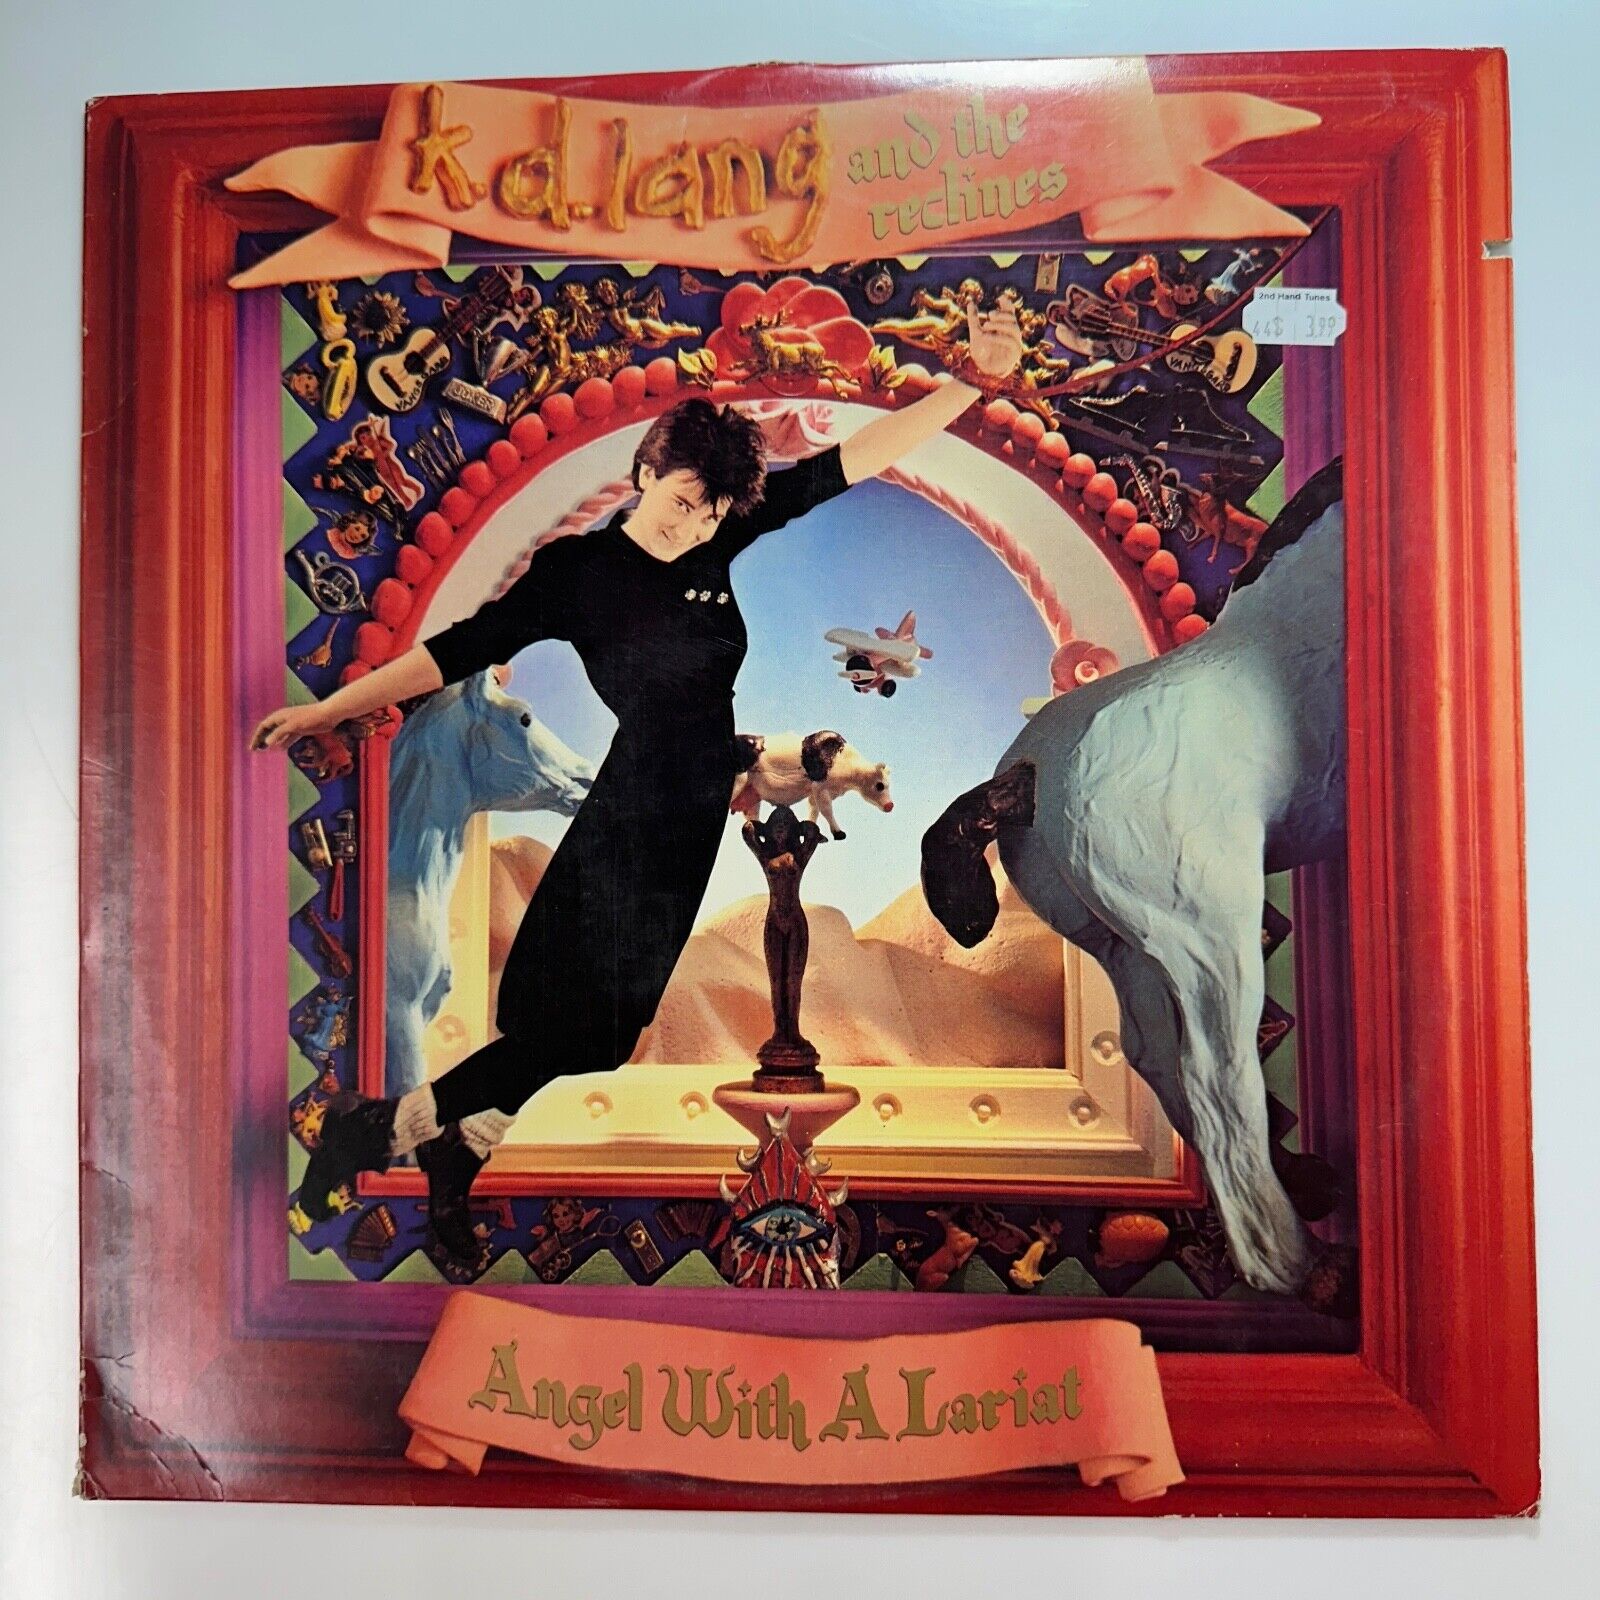 Angel With A Lariat LP Record Vinyl K.D. Lang Sire 25441